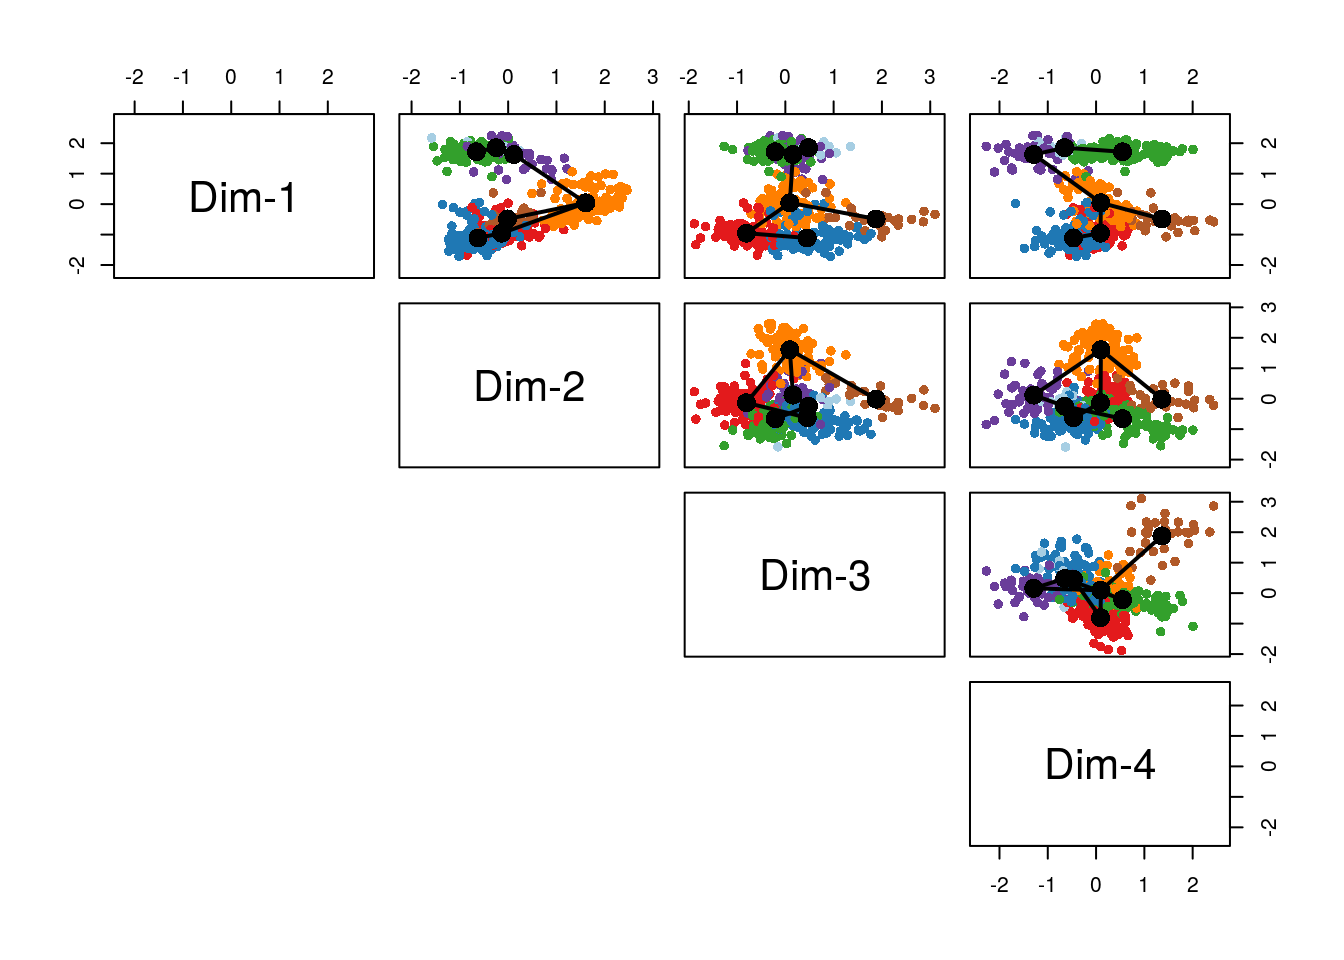 Slingshot: Cells color-coded by cluster in a 4-dimensional MDS space, with connecting lines between cluster centers representing the inferred global lineage structure.